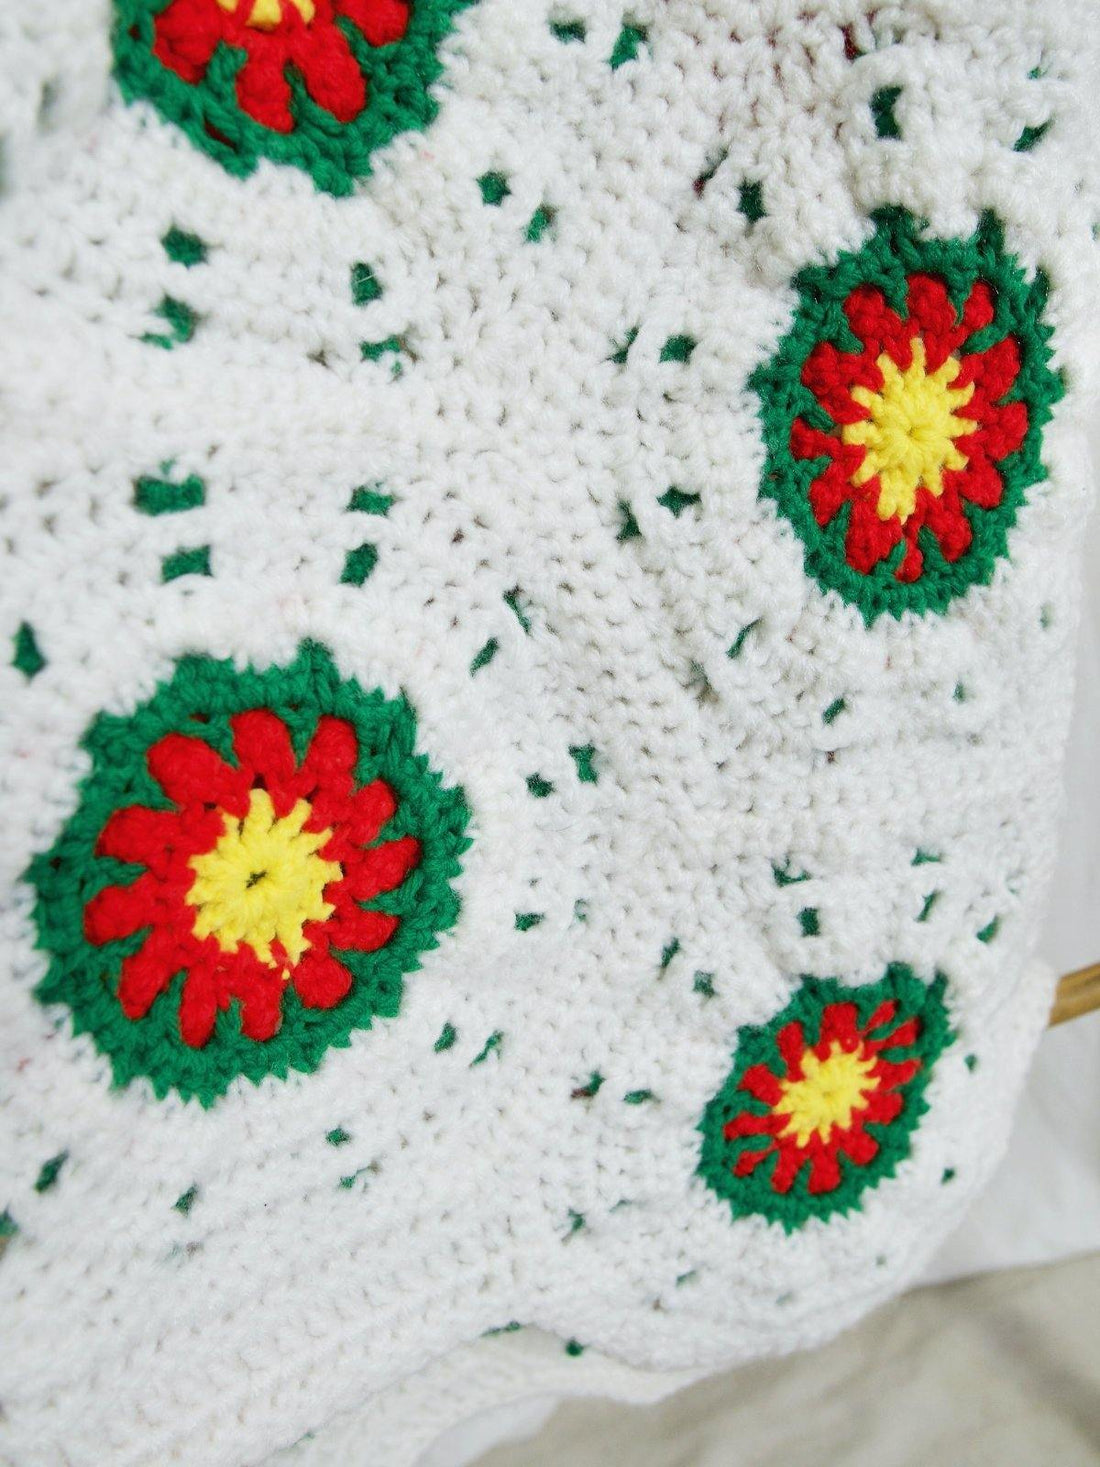 Handmade Red Poinsettia Floral Afghan-closiTherapi | vinTage